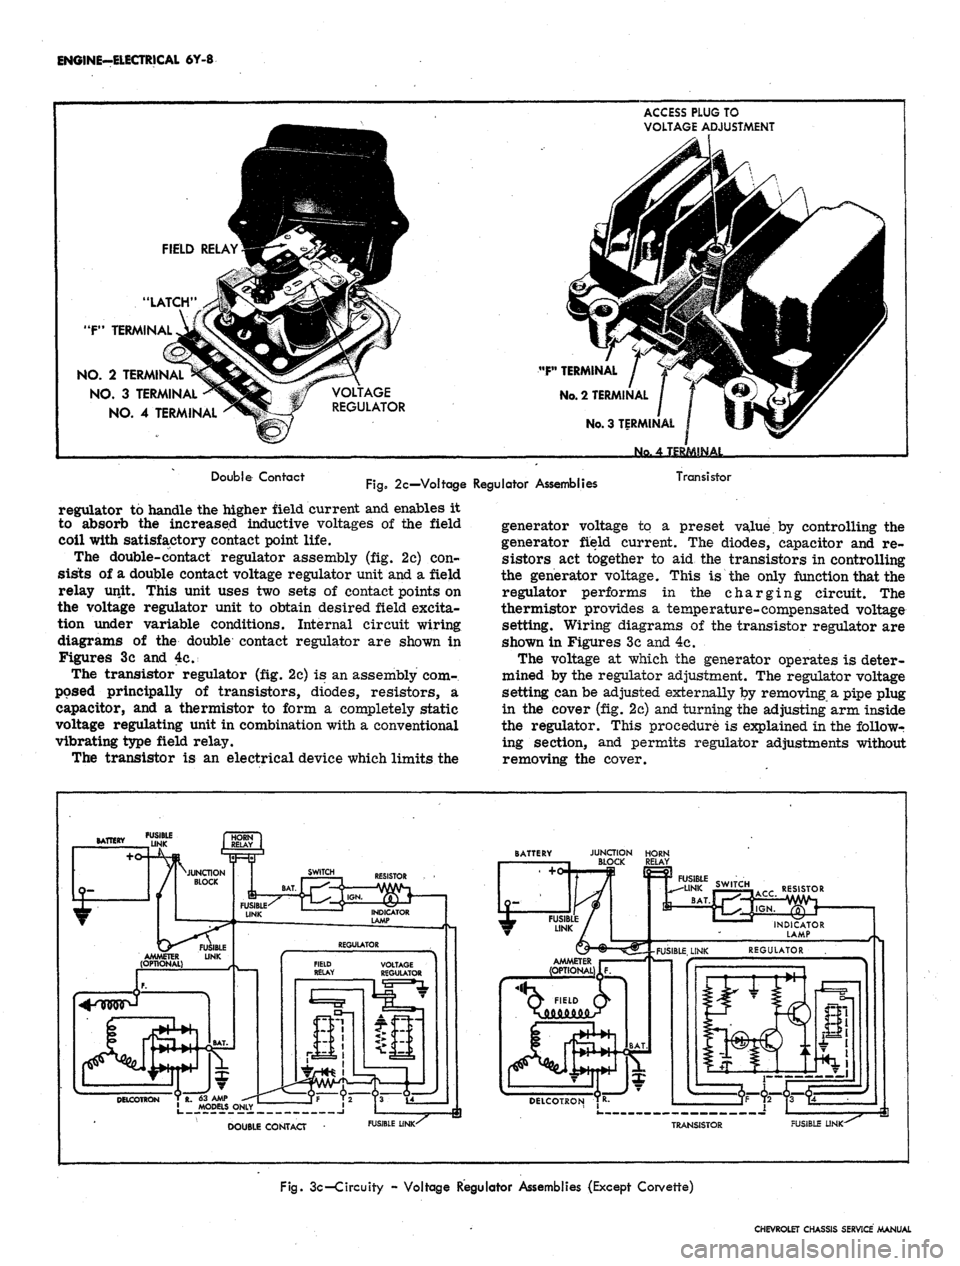 CHEVROLET CAMARO 1967 1.G Chassis Service Manual 
ENGINE-ELECTRICAL 6Y-8

1

FIELD RELAY^I^p2

"LATCH"
 ^PFN?^

"P1
 TERMINAL
 JyJvJCTl^

NO. 2 TERMINAD^5^^^«

NO.
 3 TERMINAL ^S5«£

NO.
 4 TERMINAL ^^^ 
m

# / VOLTAGE

¥ REGULATOR

1 
ACCESS PL